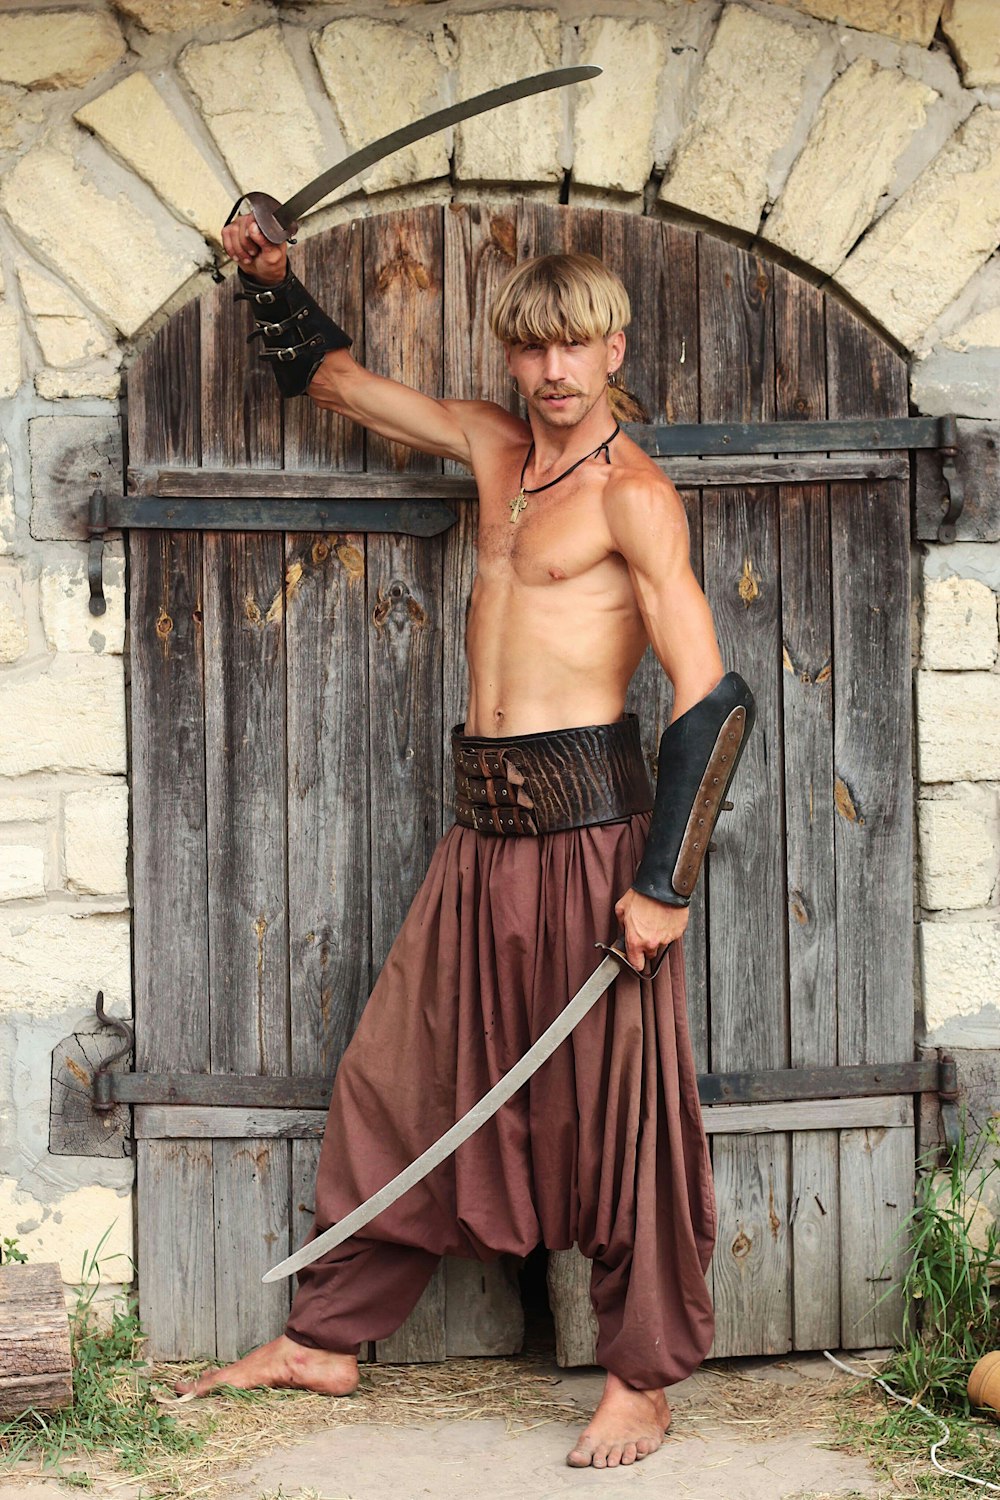 man holding two swords while standing in front of brown gate